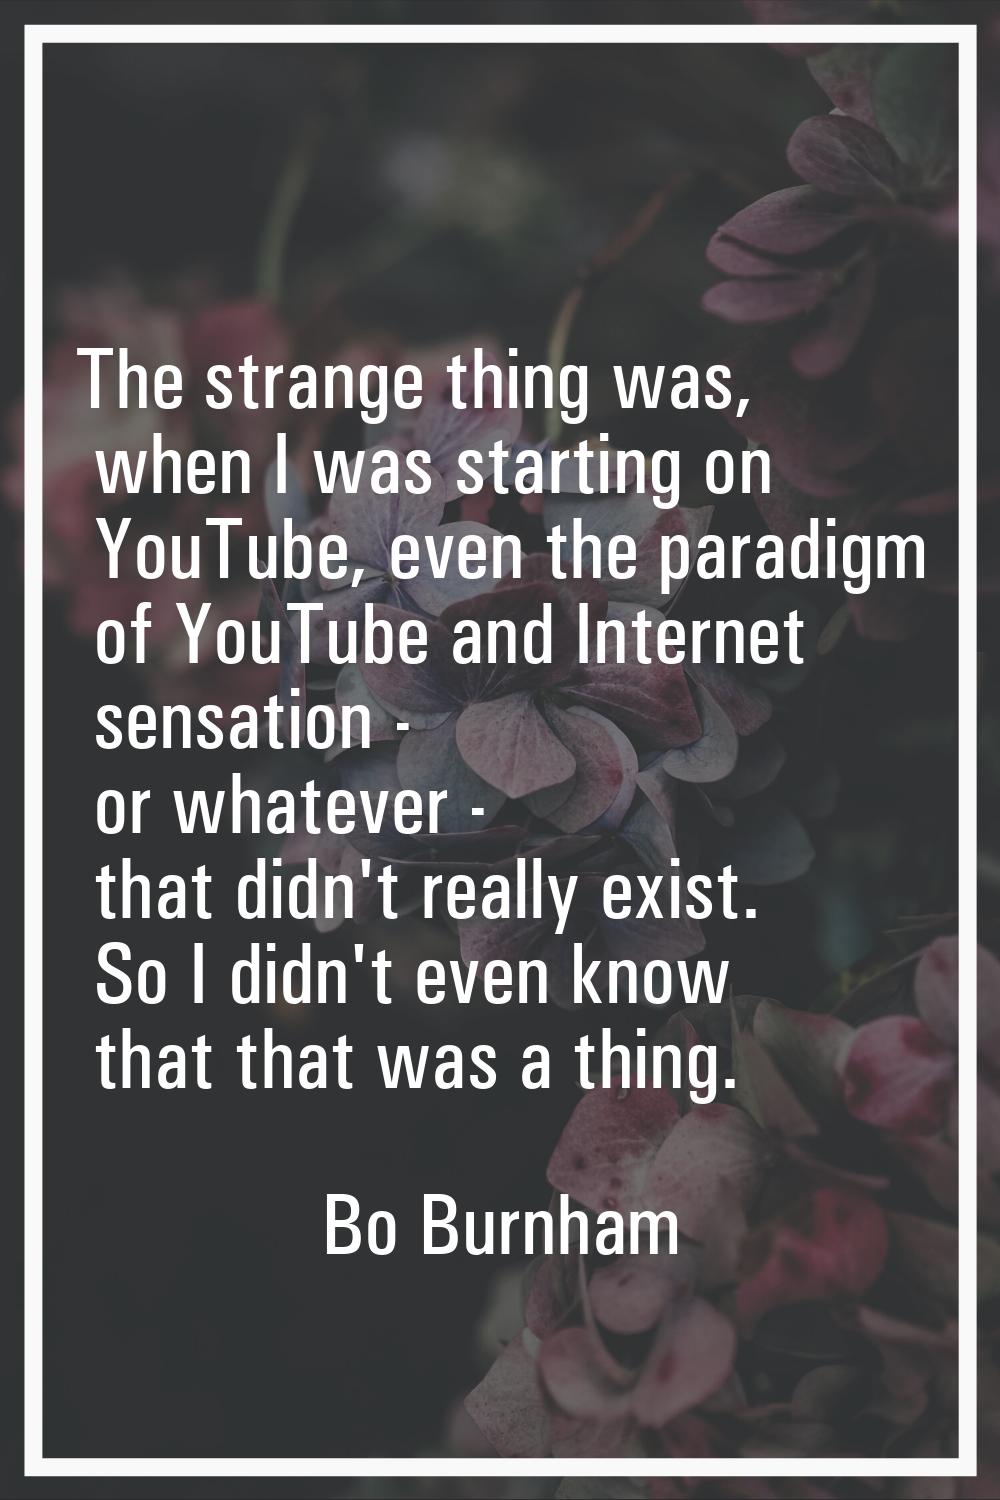 The strange thing was, when I was starting on YouTube, even the paradigm of YouTube and Internet se